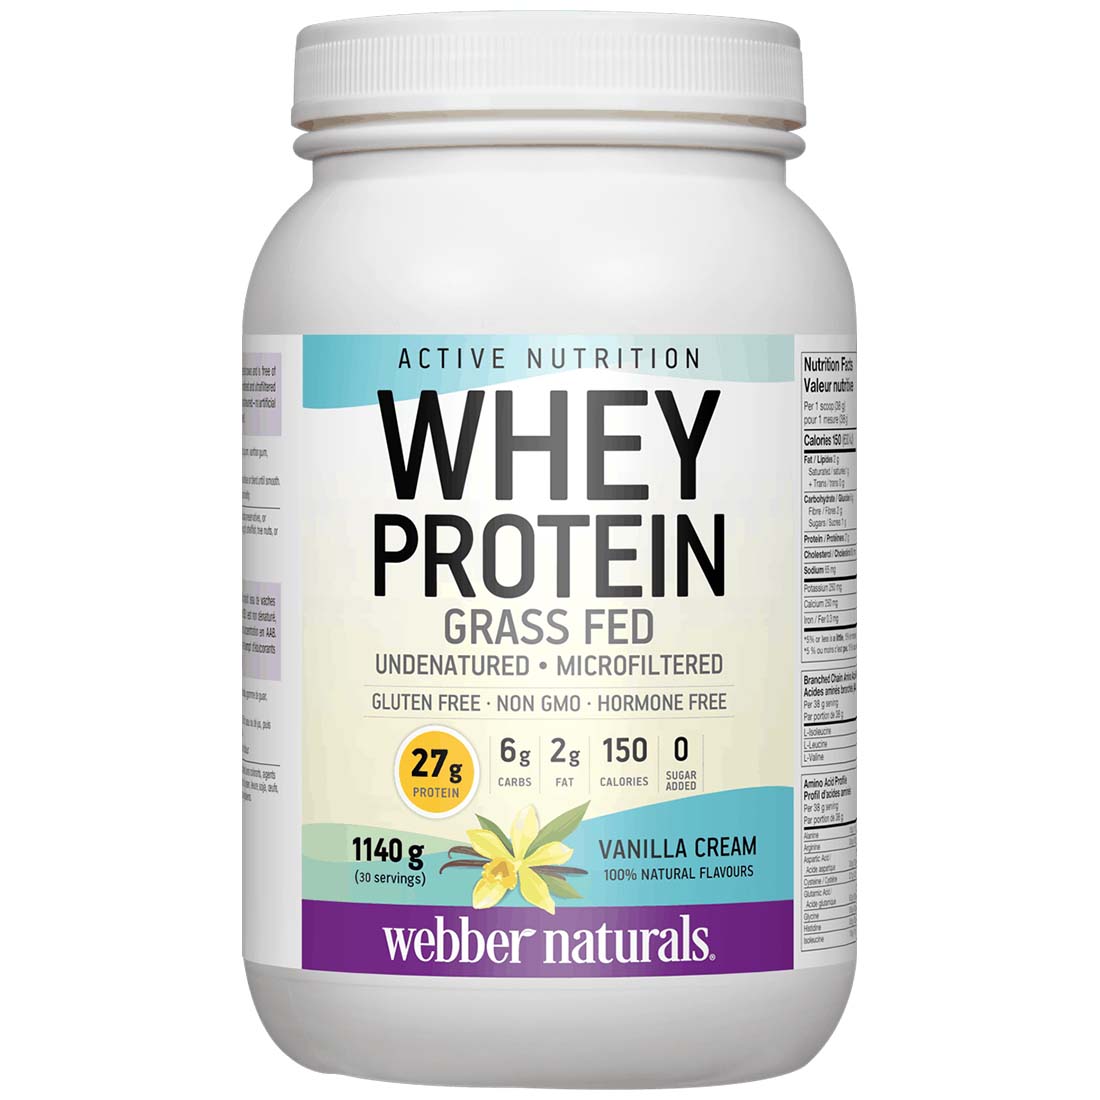 Webber Naturals Grass Fed Whey Protein, 27g Protein, All Natural, Non-GMO, Gluten-Free, 30 Servings